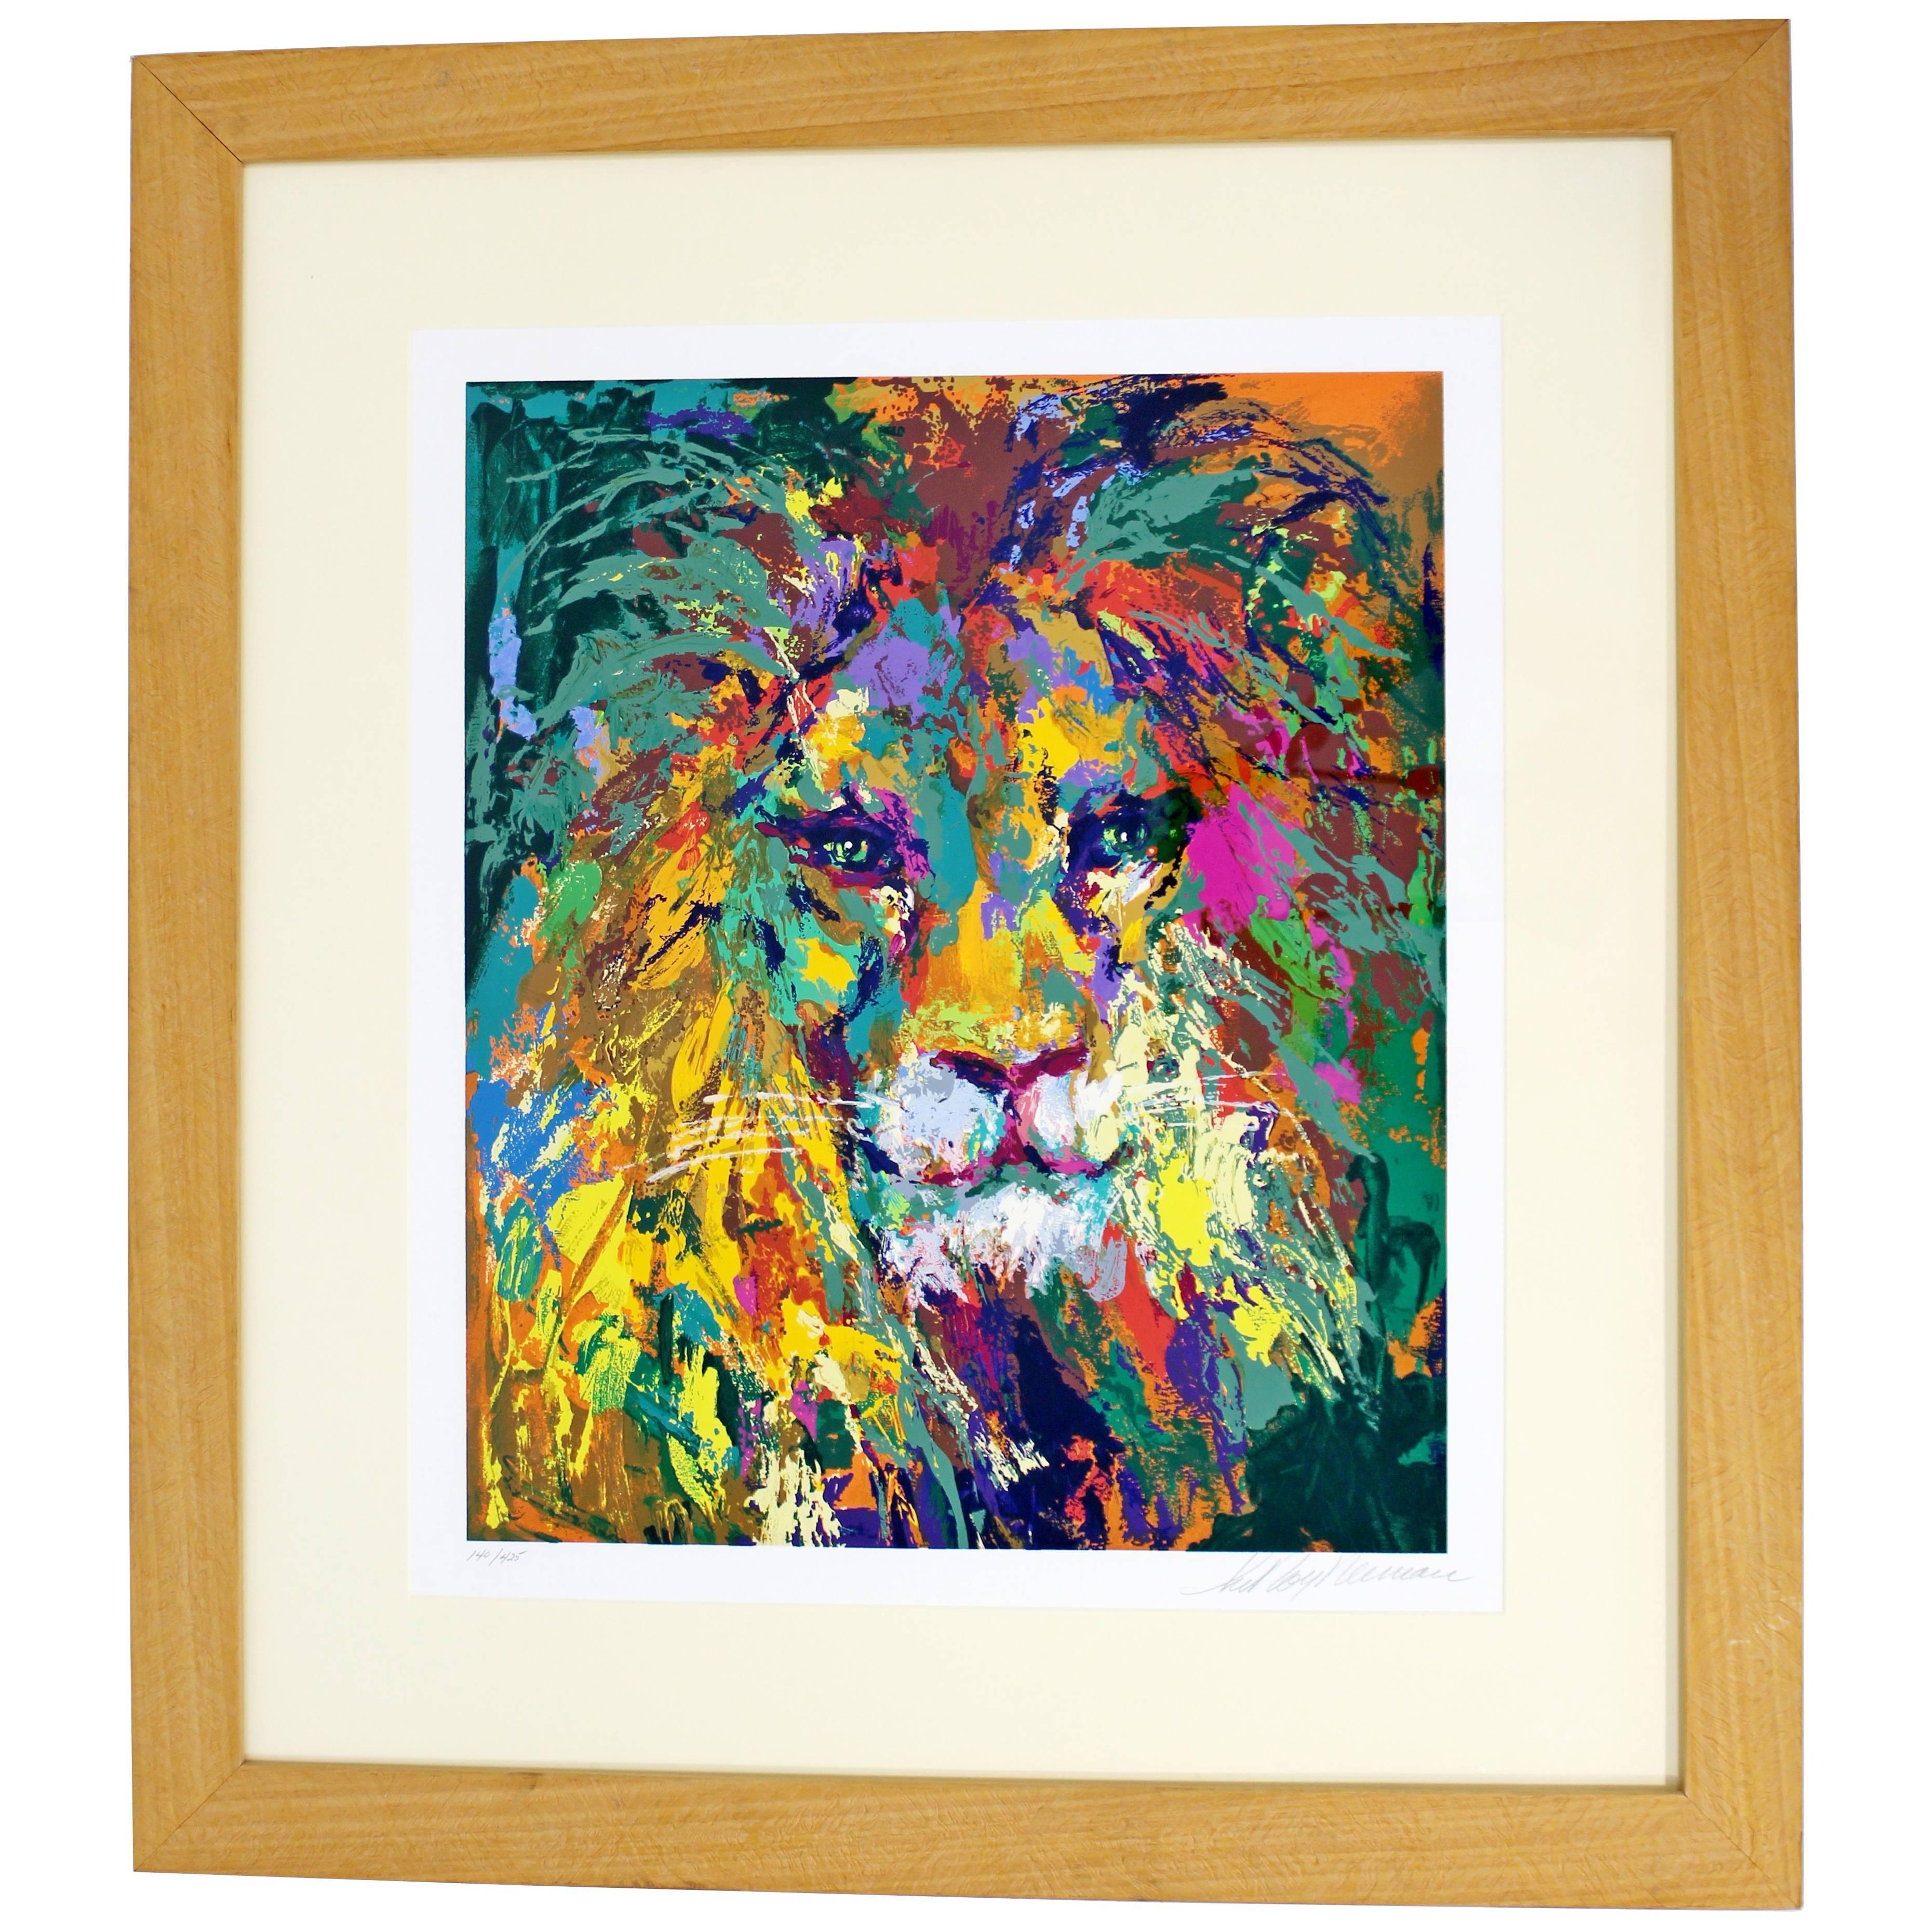 Mid-Century Modern Portrait of Lion Serigraph Signed Numbered by Leroy Neiman